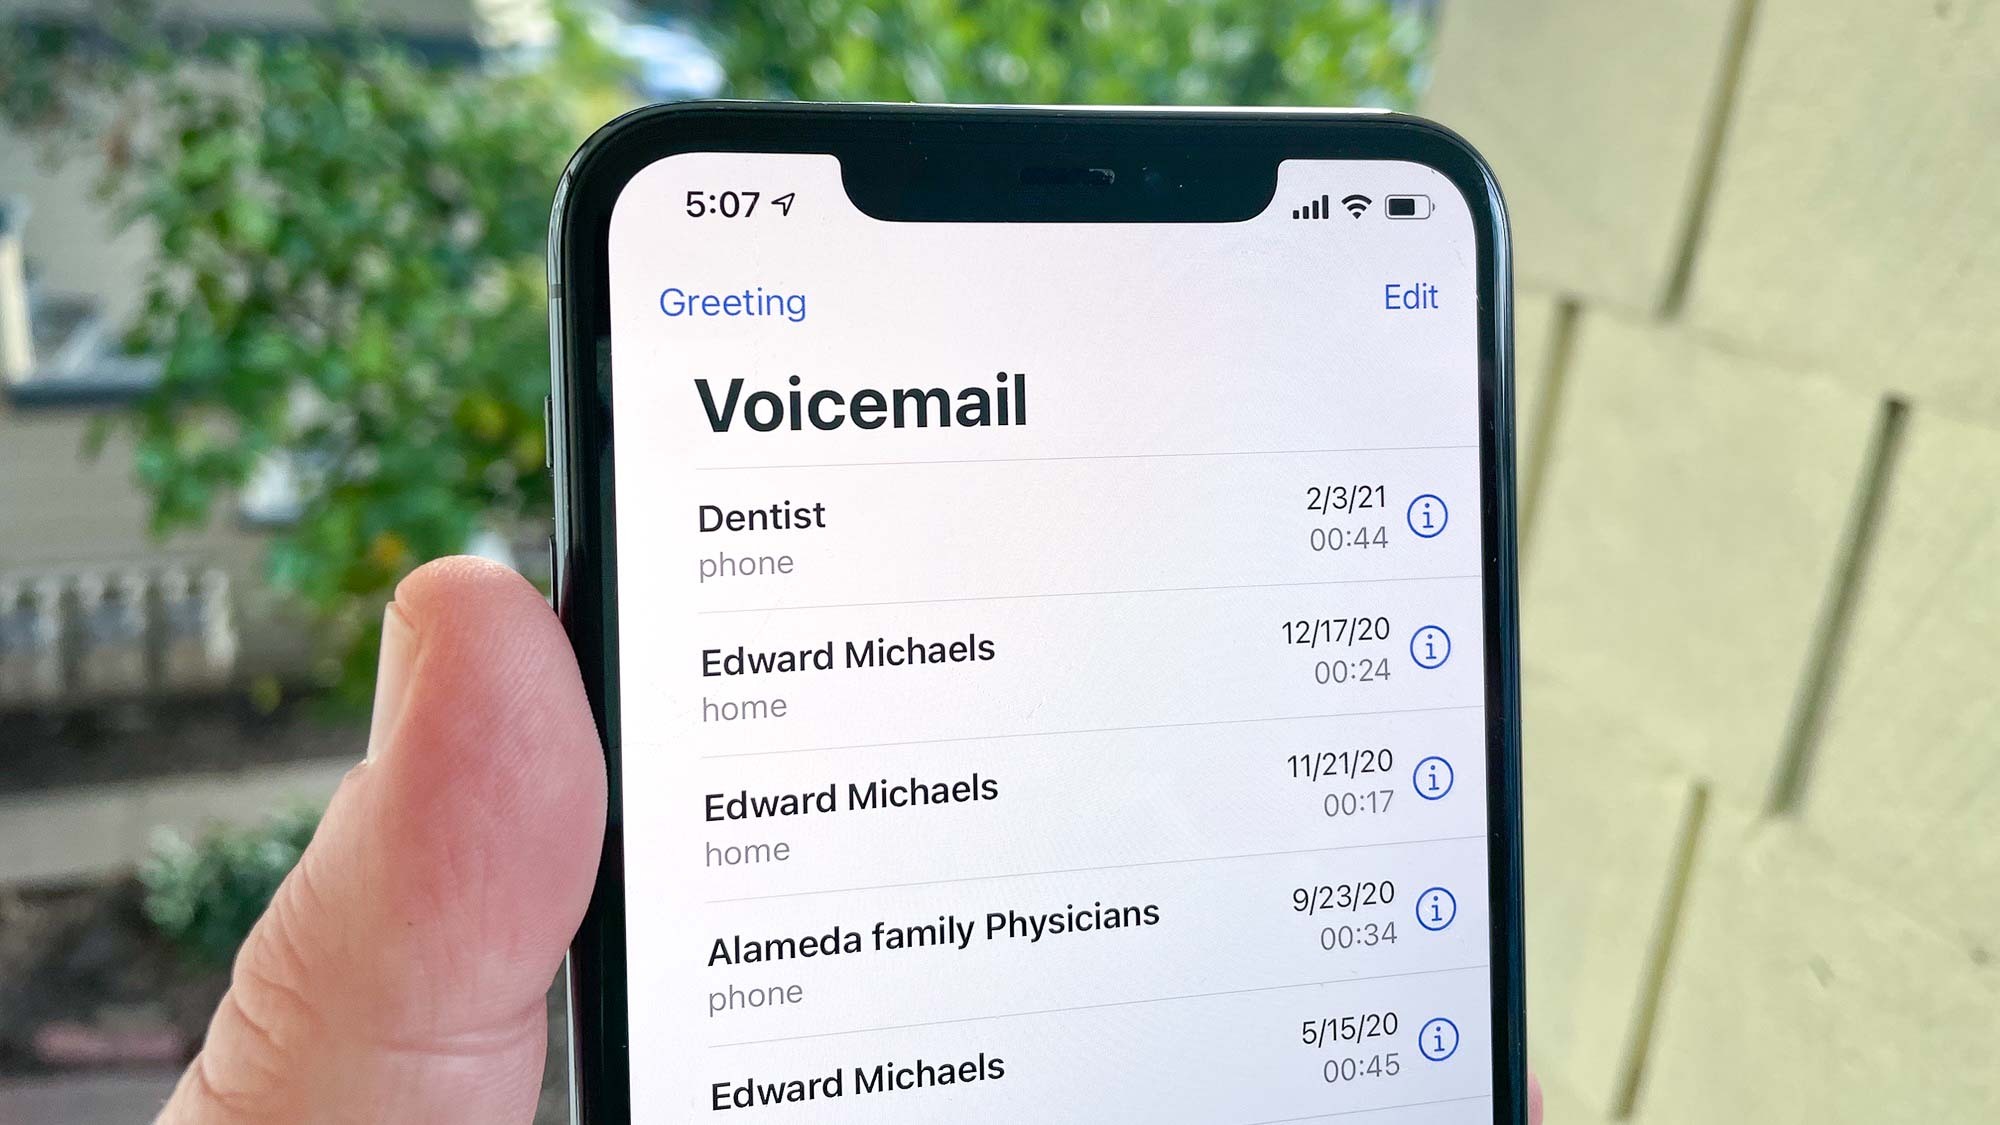 How To Set up Voicemail in iPhone